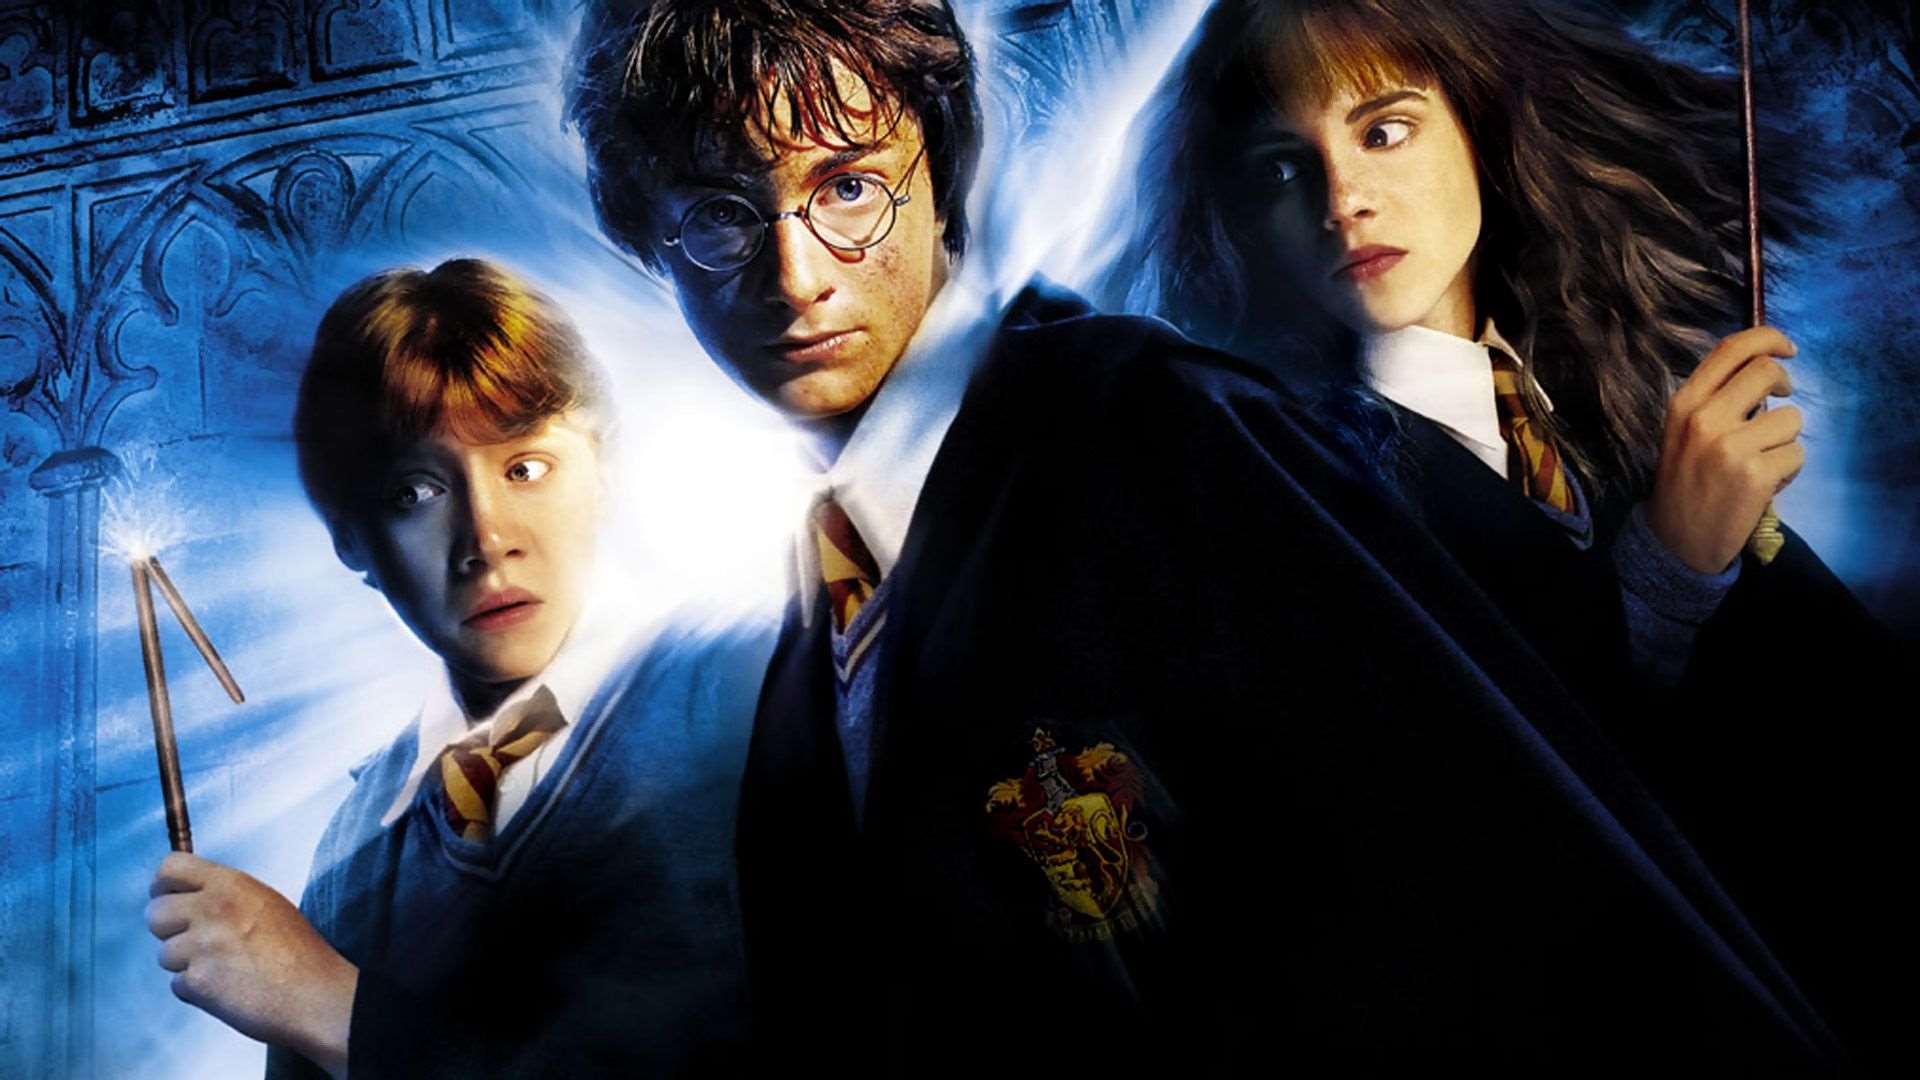 Harry Potter And The Chamber Of Secrets Backgrounds, Compatible - PC, Mobile, Gadgets| 1920x1080 px